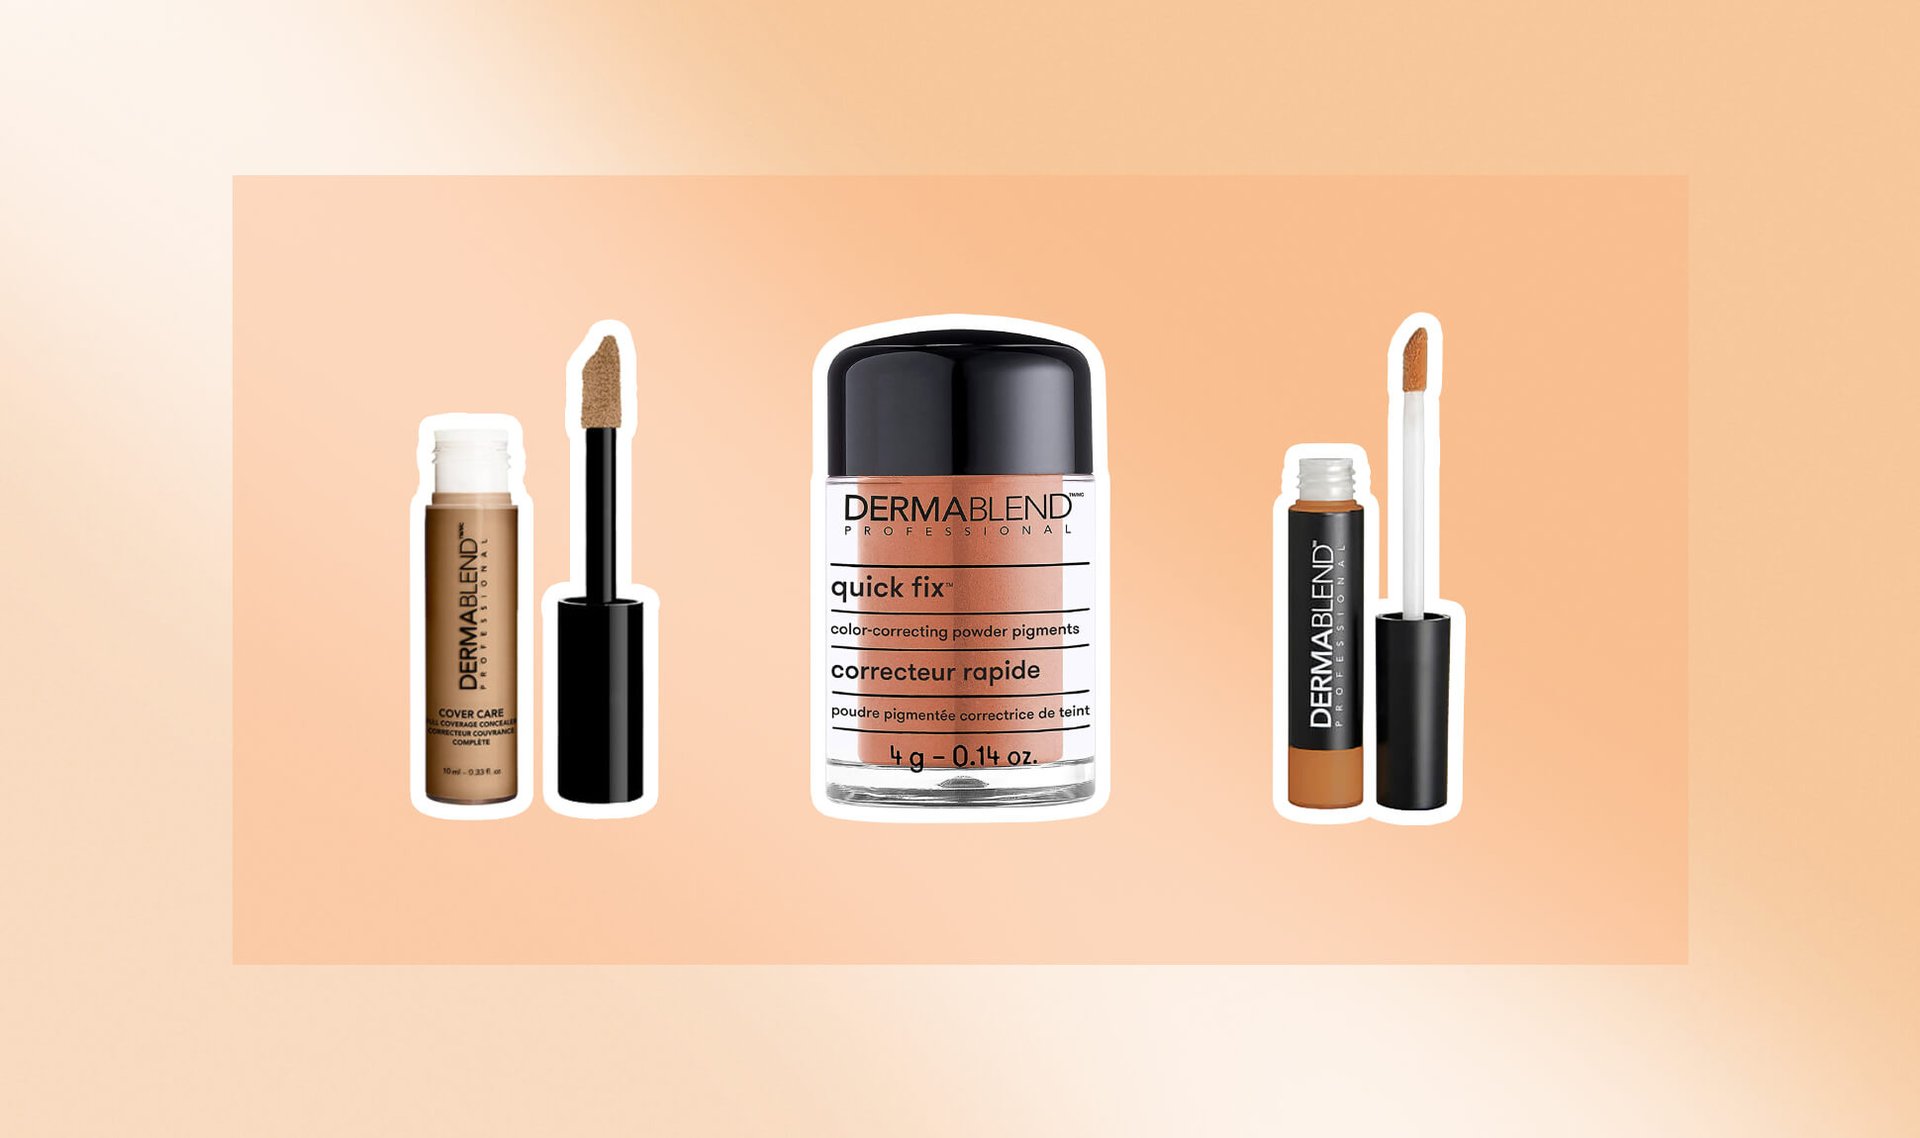  A Definitive Guide to the Best Full-Coverage Concealers From Dermablend